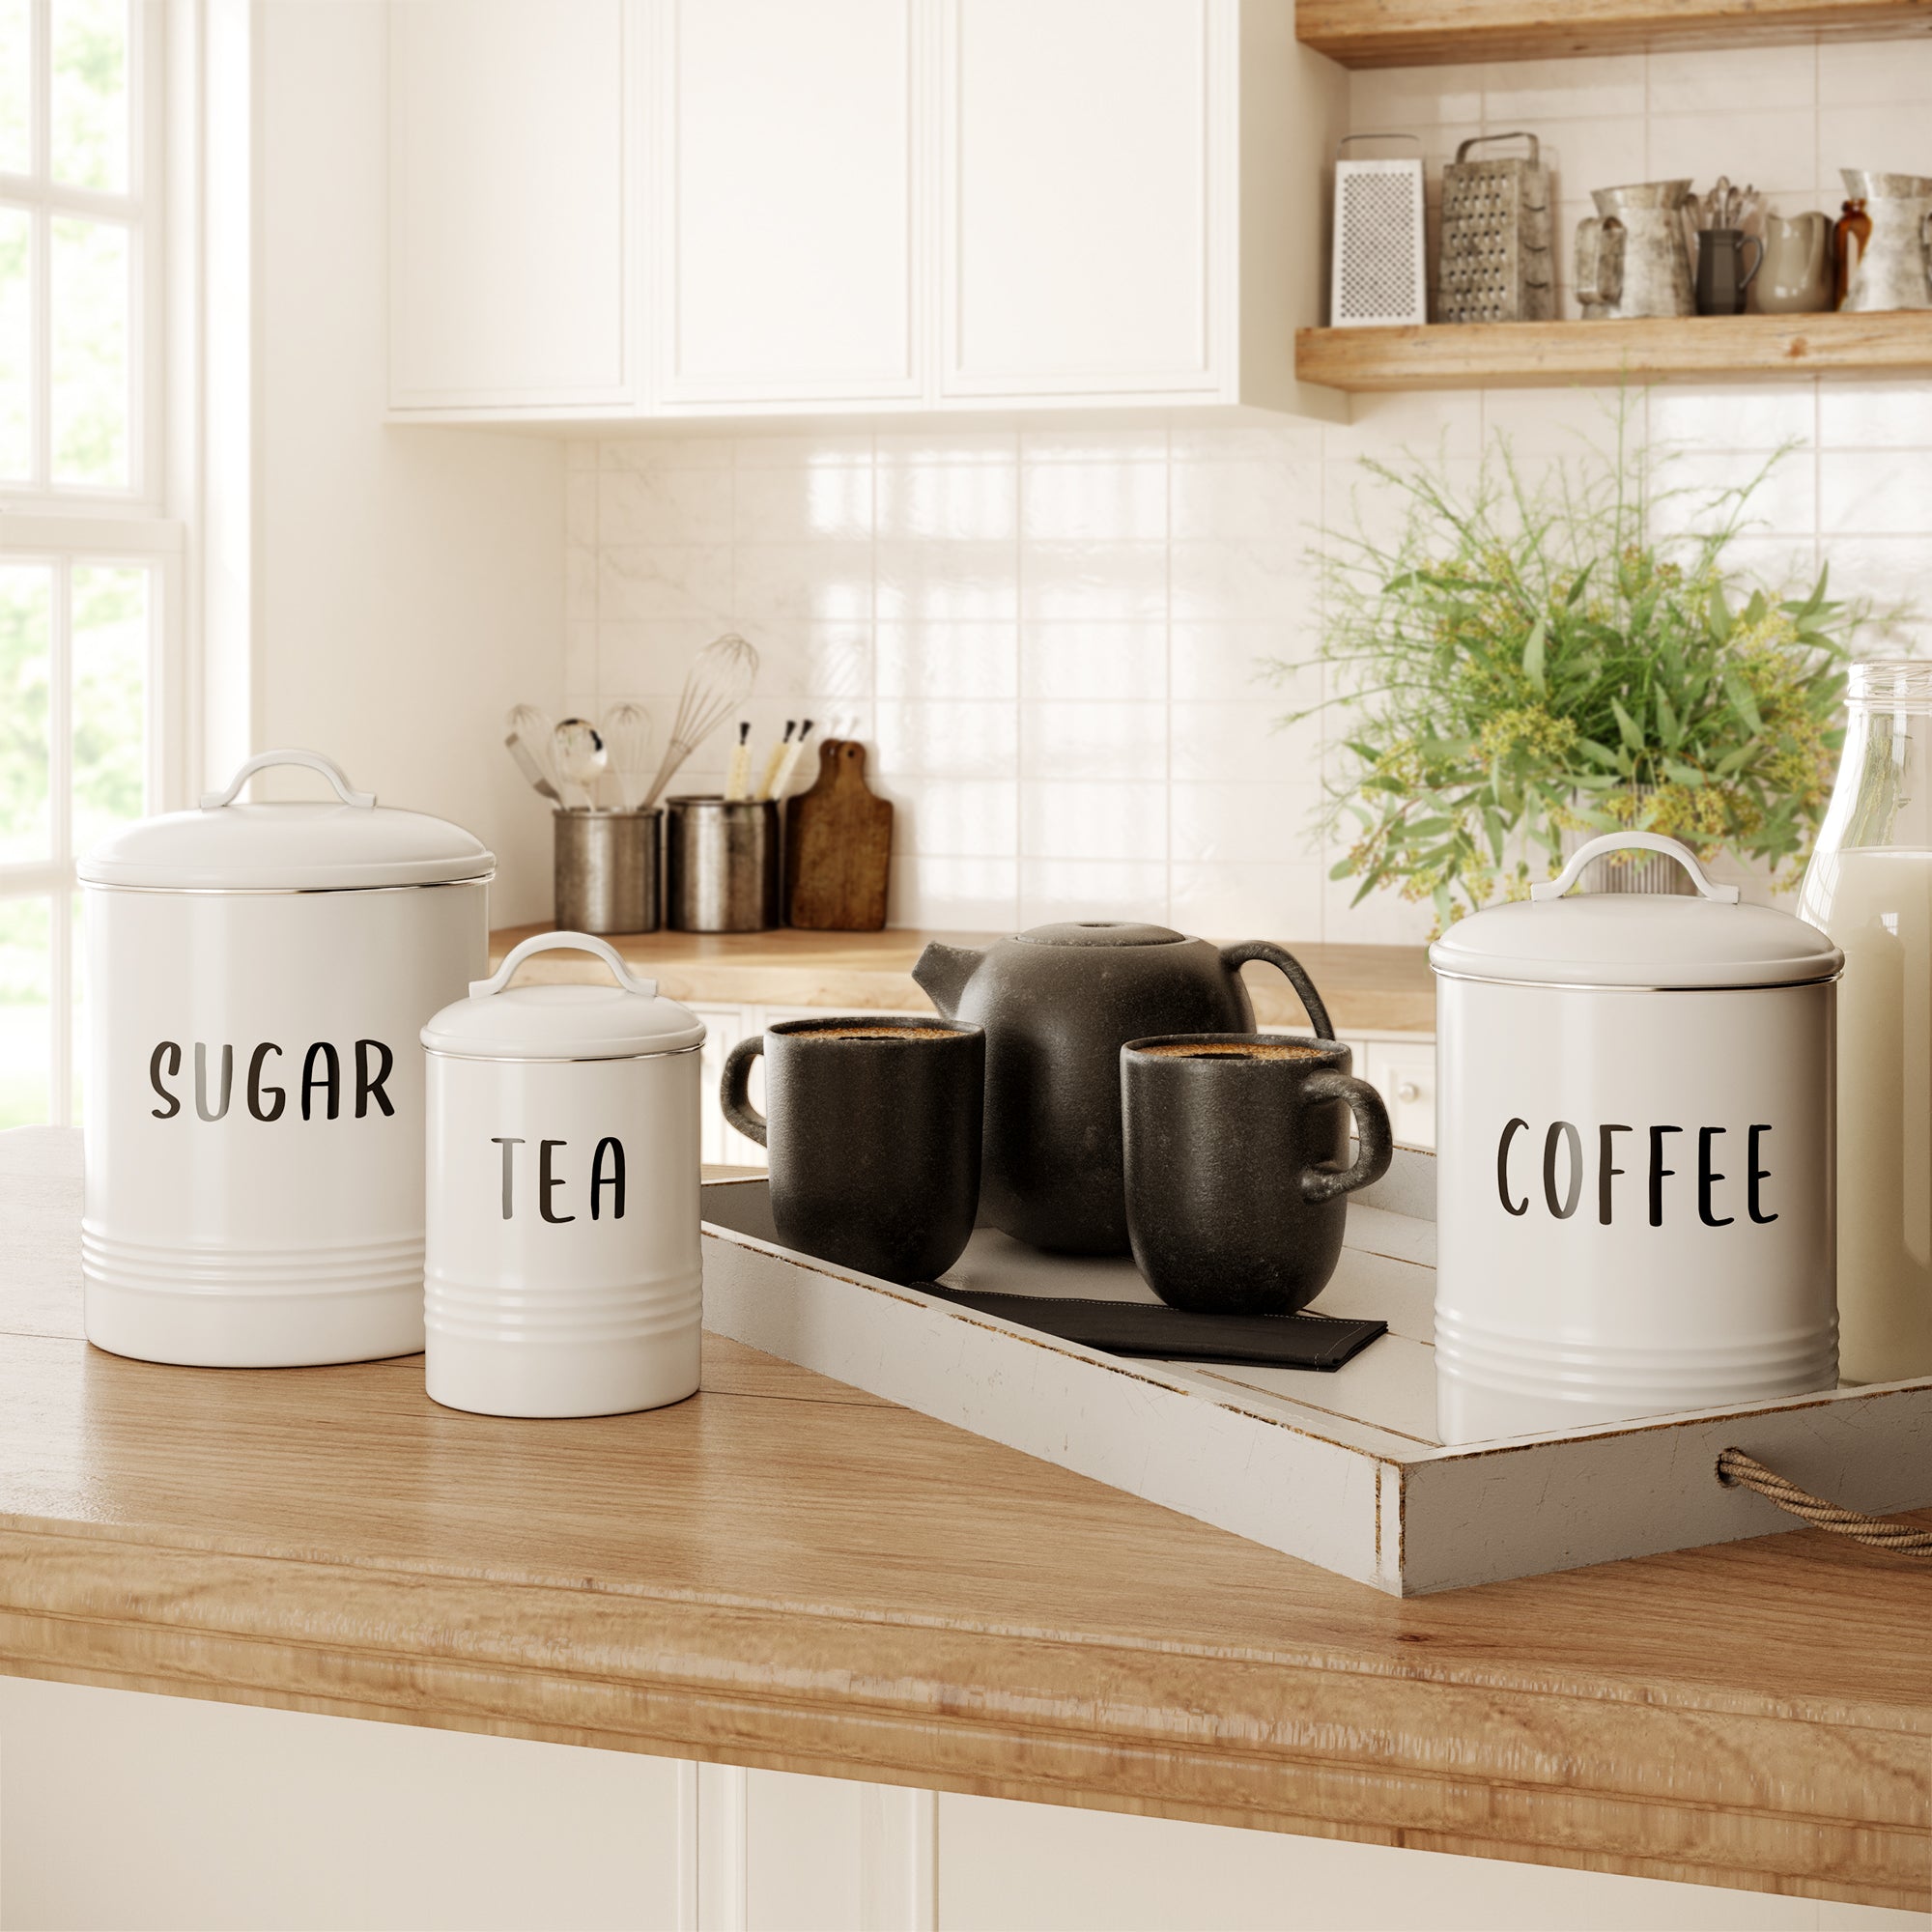 Barnyard Designs Canister Sets for Kitchen Counter, Ceramic